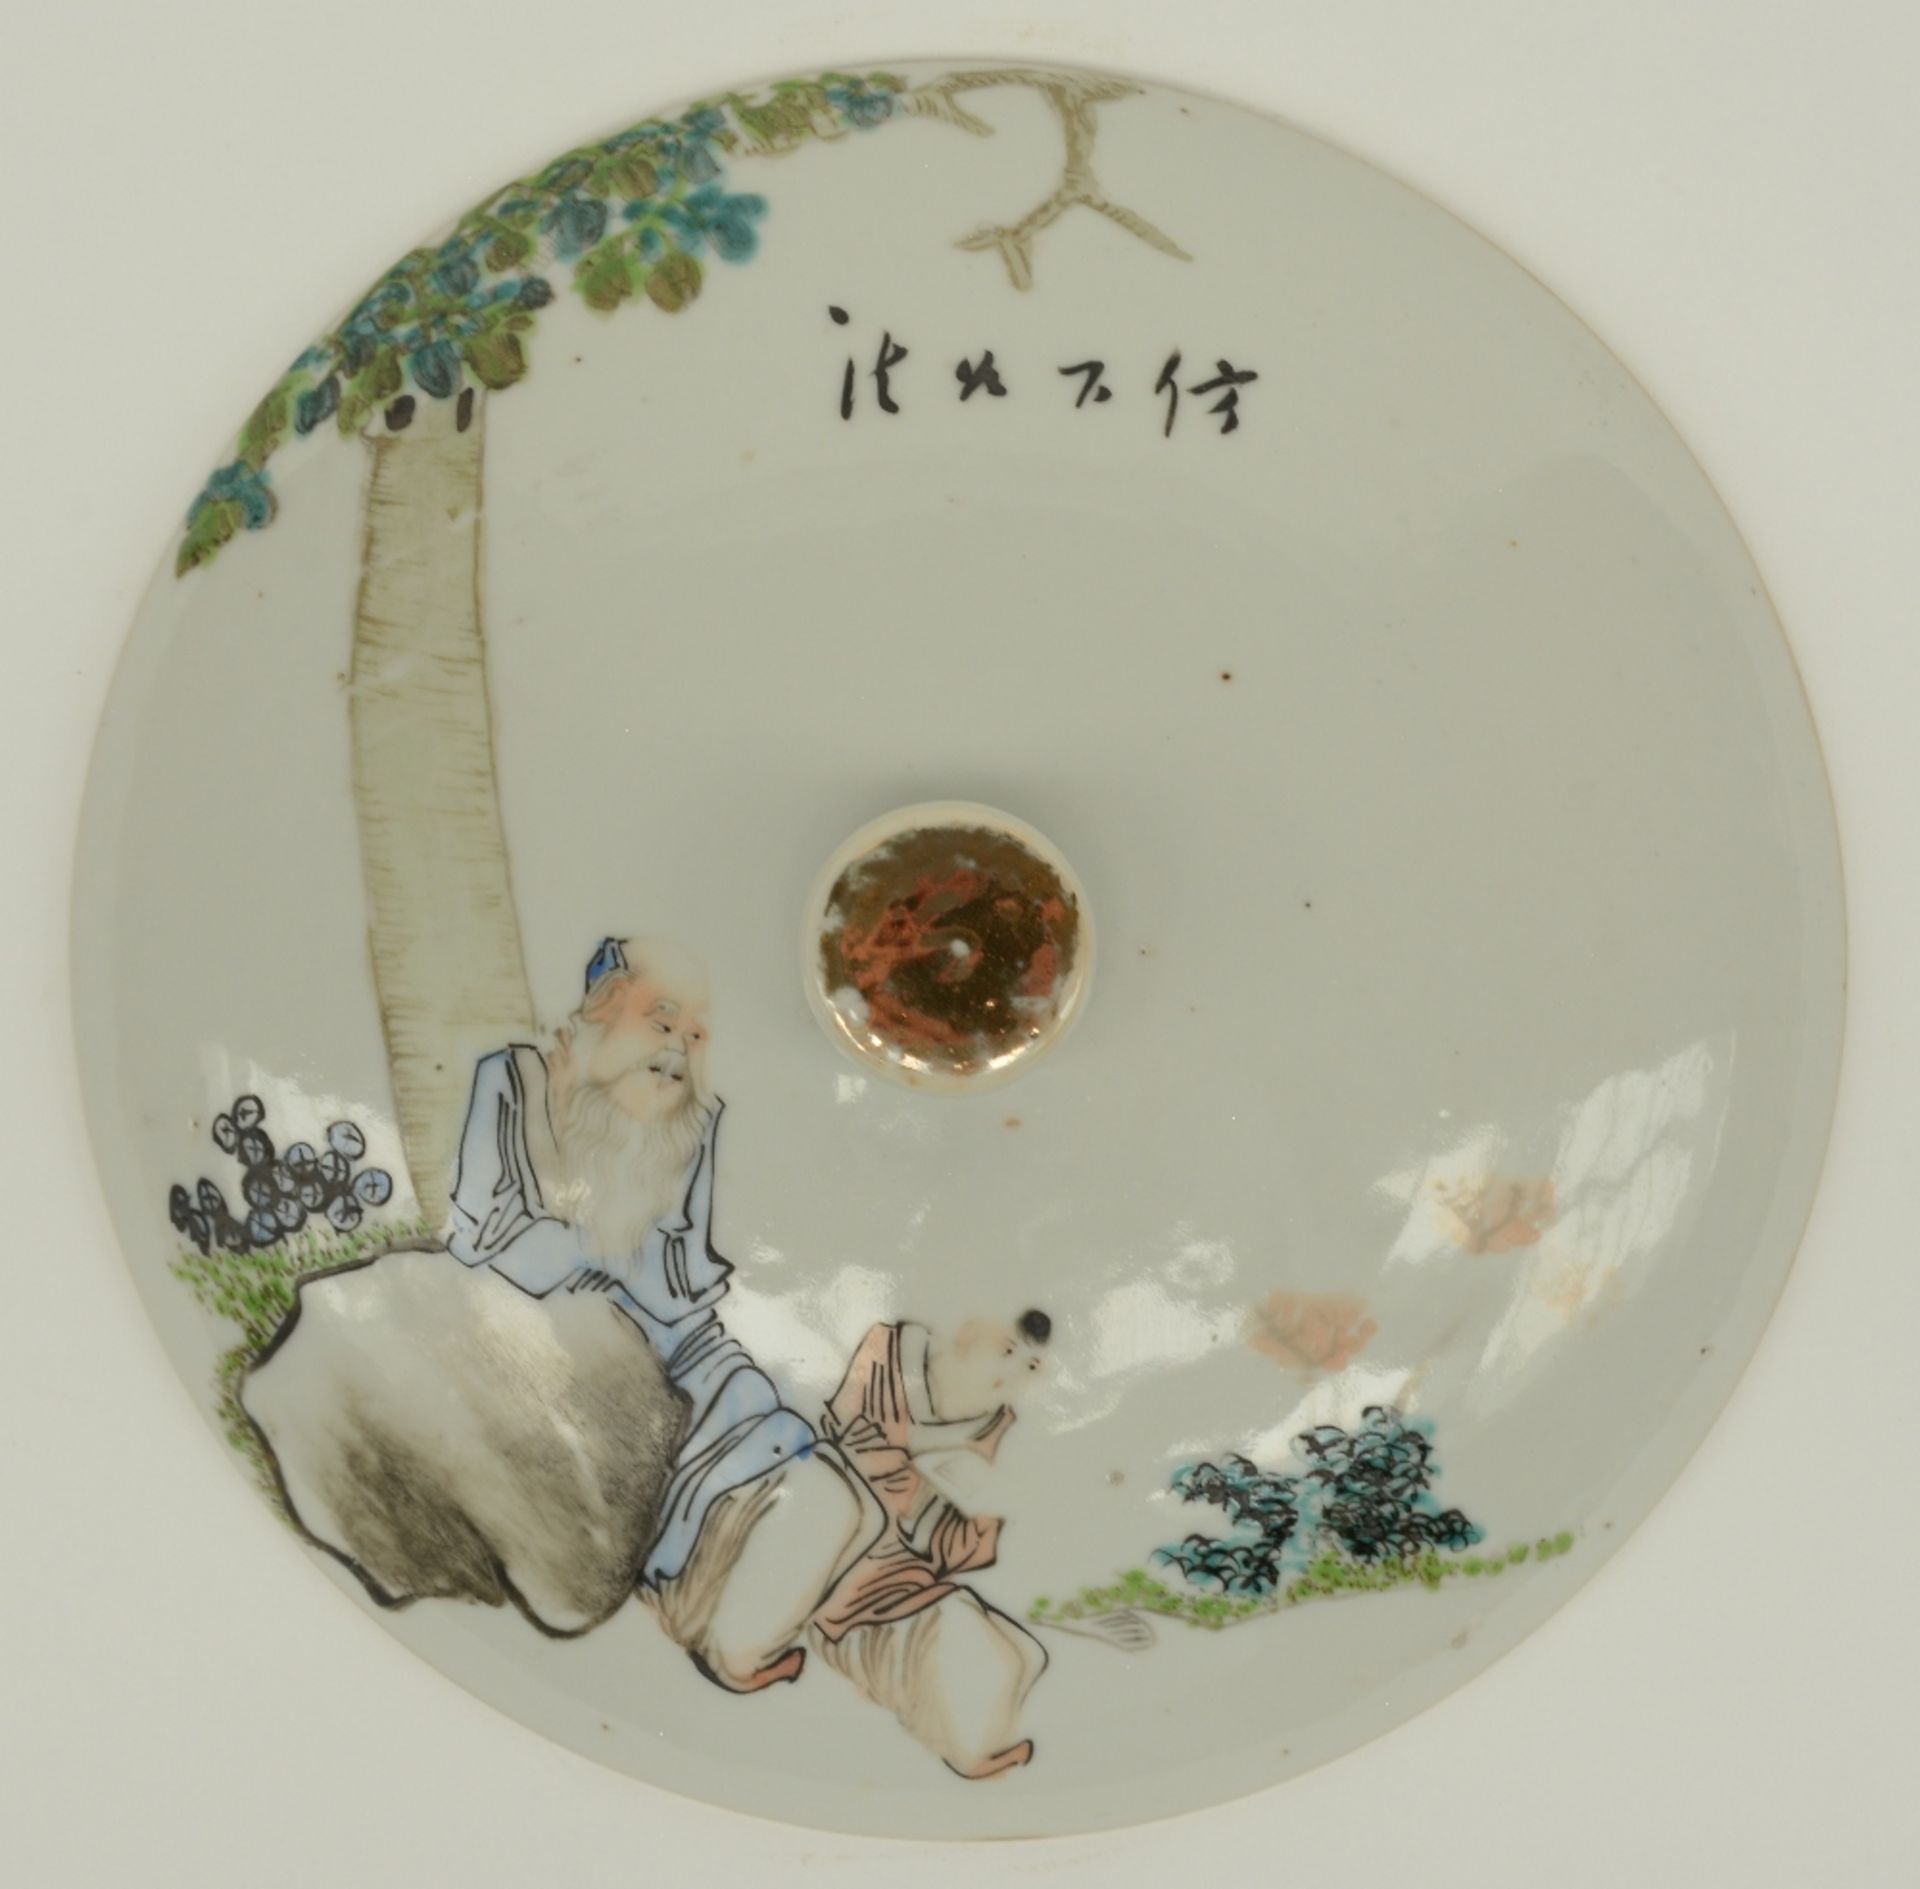 A Chinese bowl with cover, polychrome decorated with figures, H 11,5 - Diameter 24,5 cm - Bild 8 aus 8